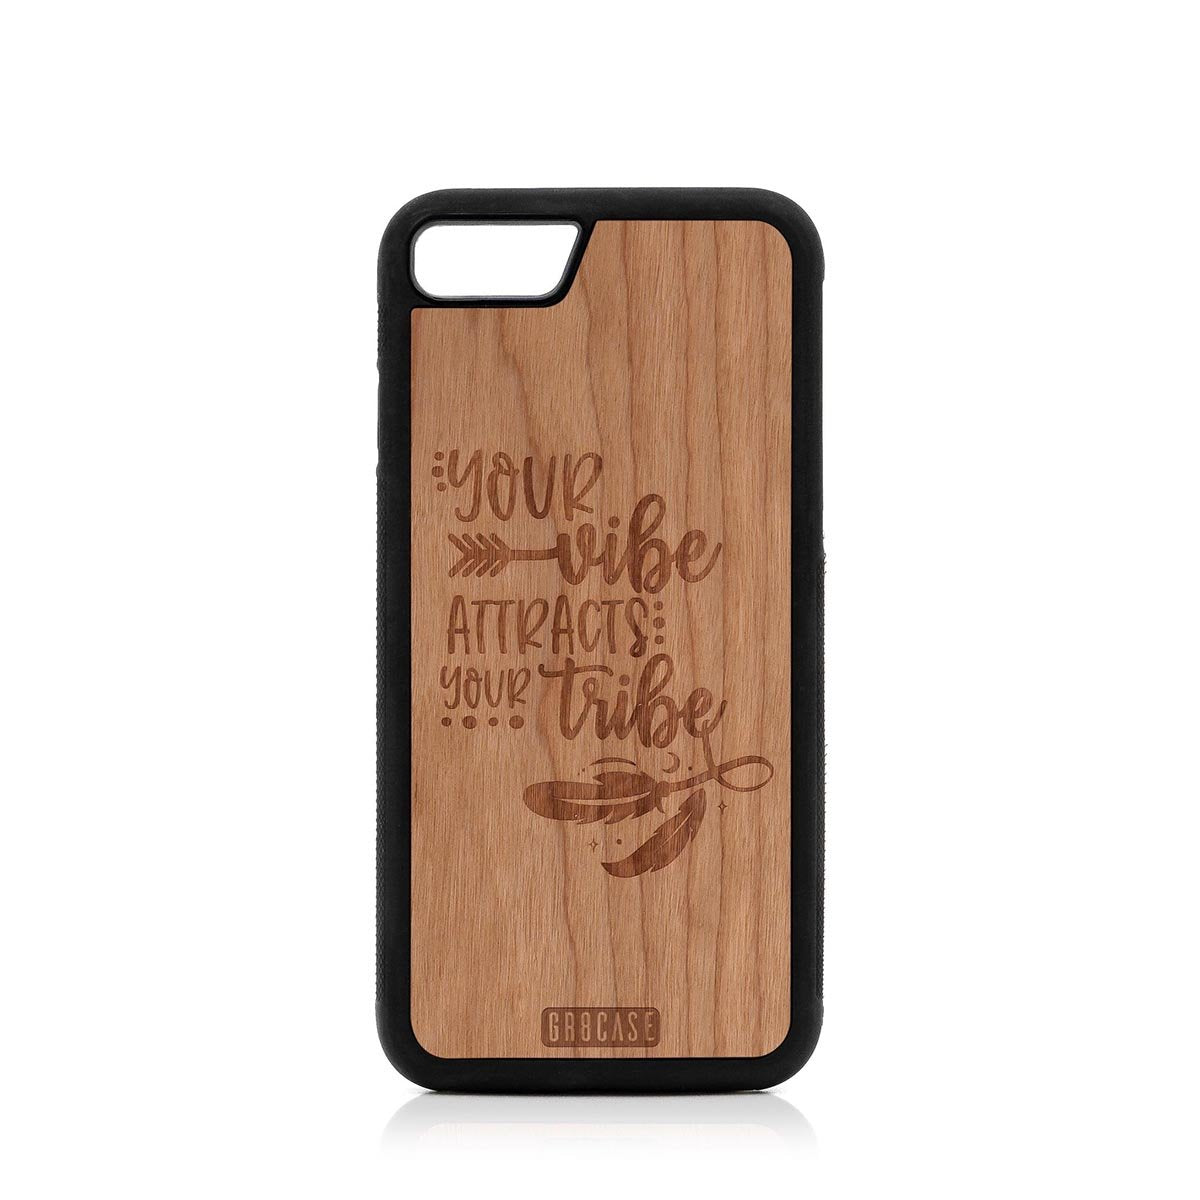 Your Vibe Attracts Your Tribe Design Wood Case For iPhone SE 2020